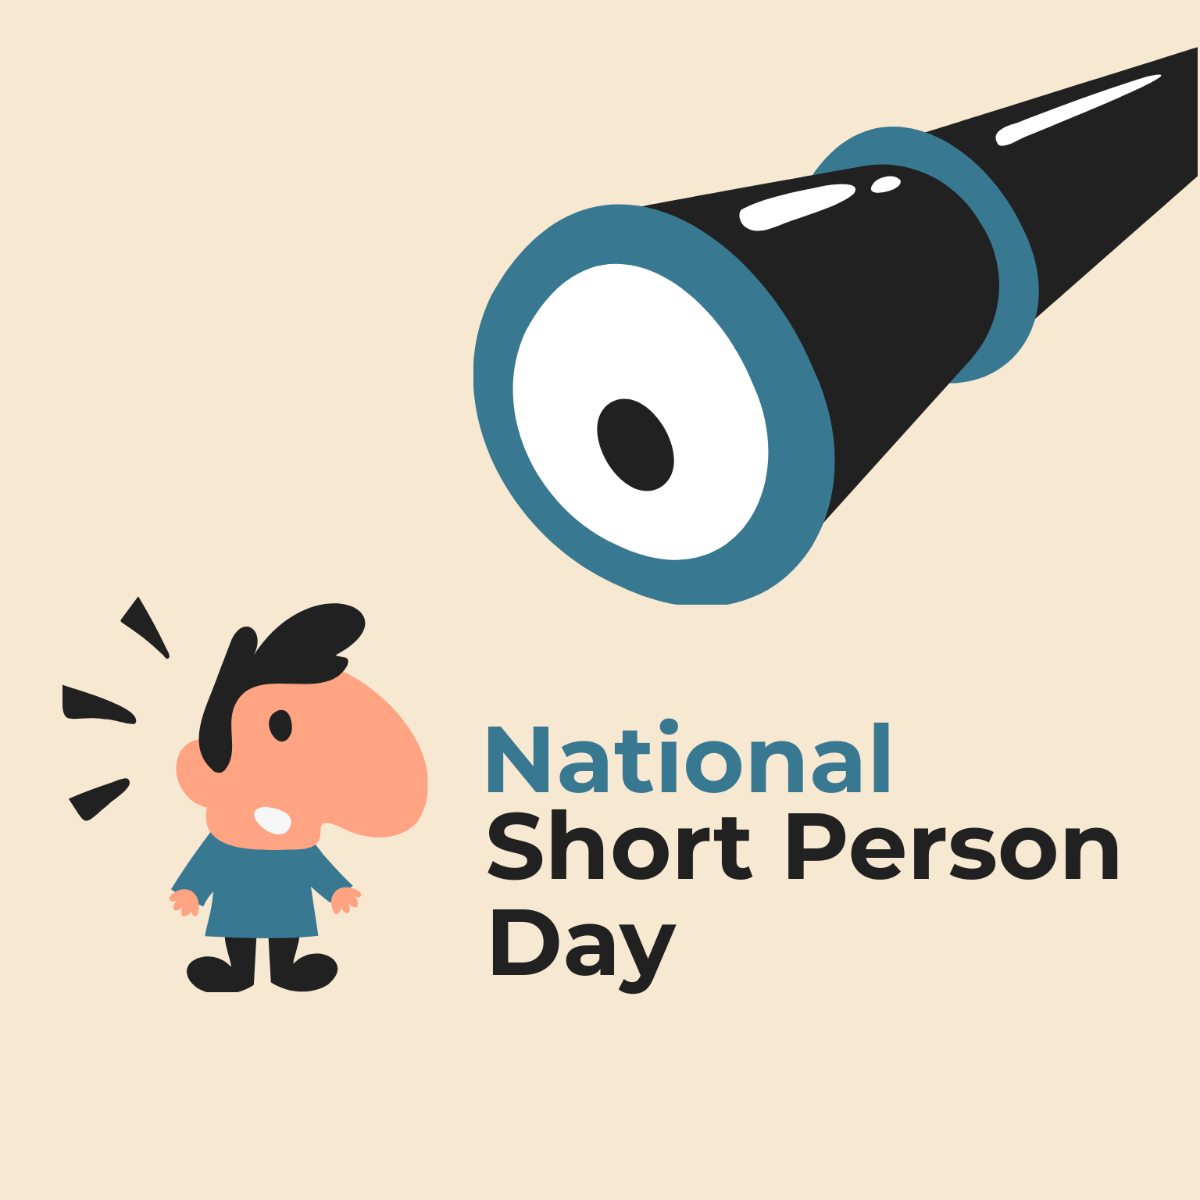 National Short Person Day Illustration Template